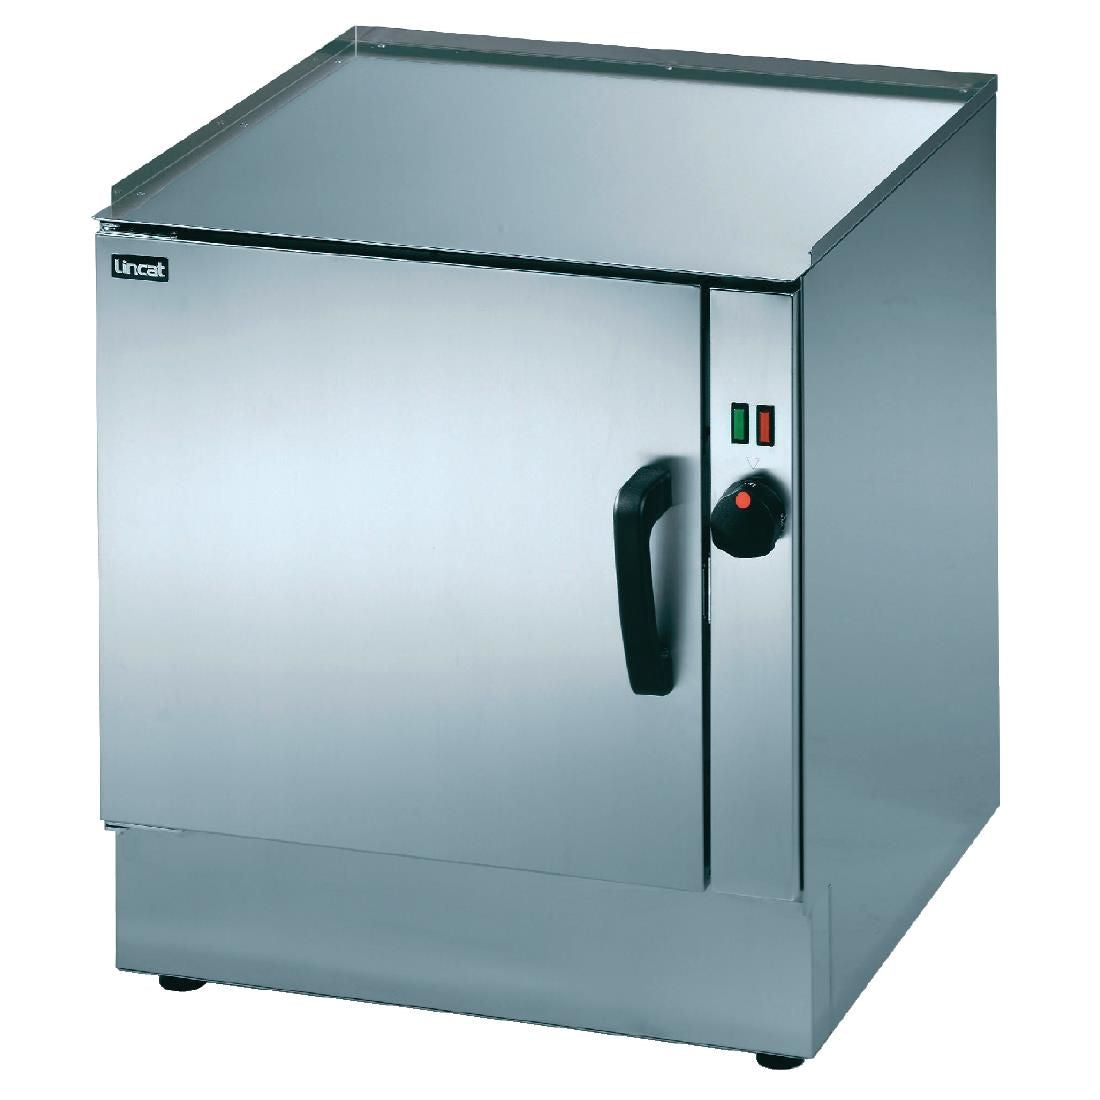 V6 - Lincat Silverlink 600 Electric Free-standing Oven - W 600 mm - 3.0 kW